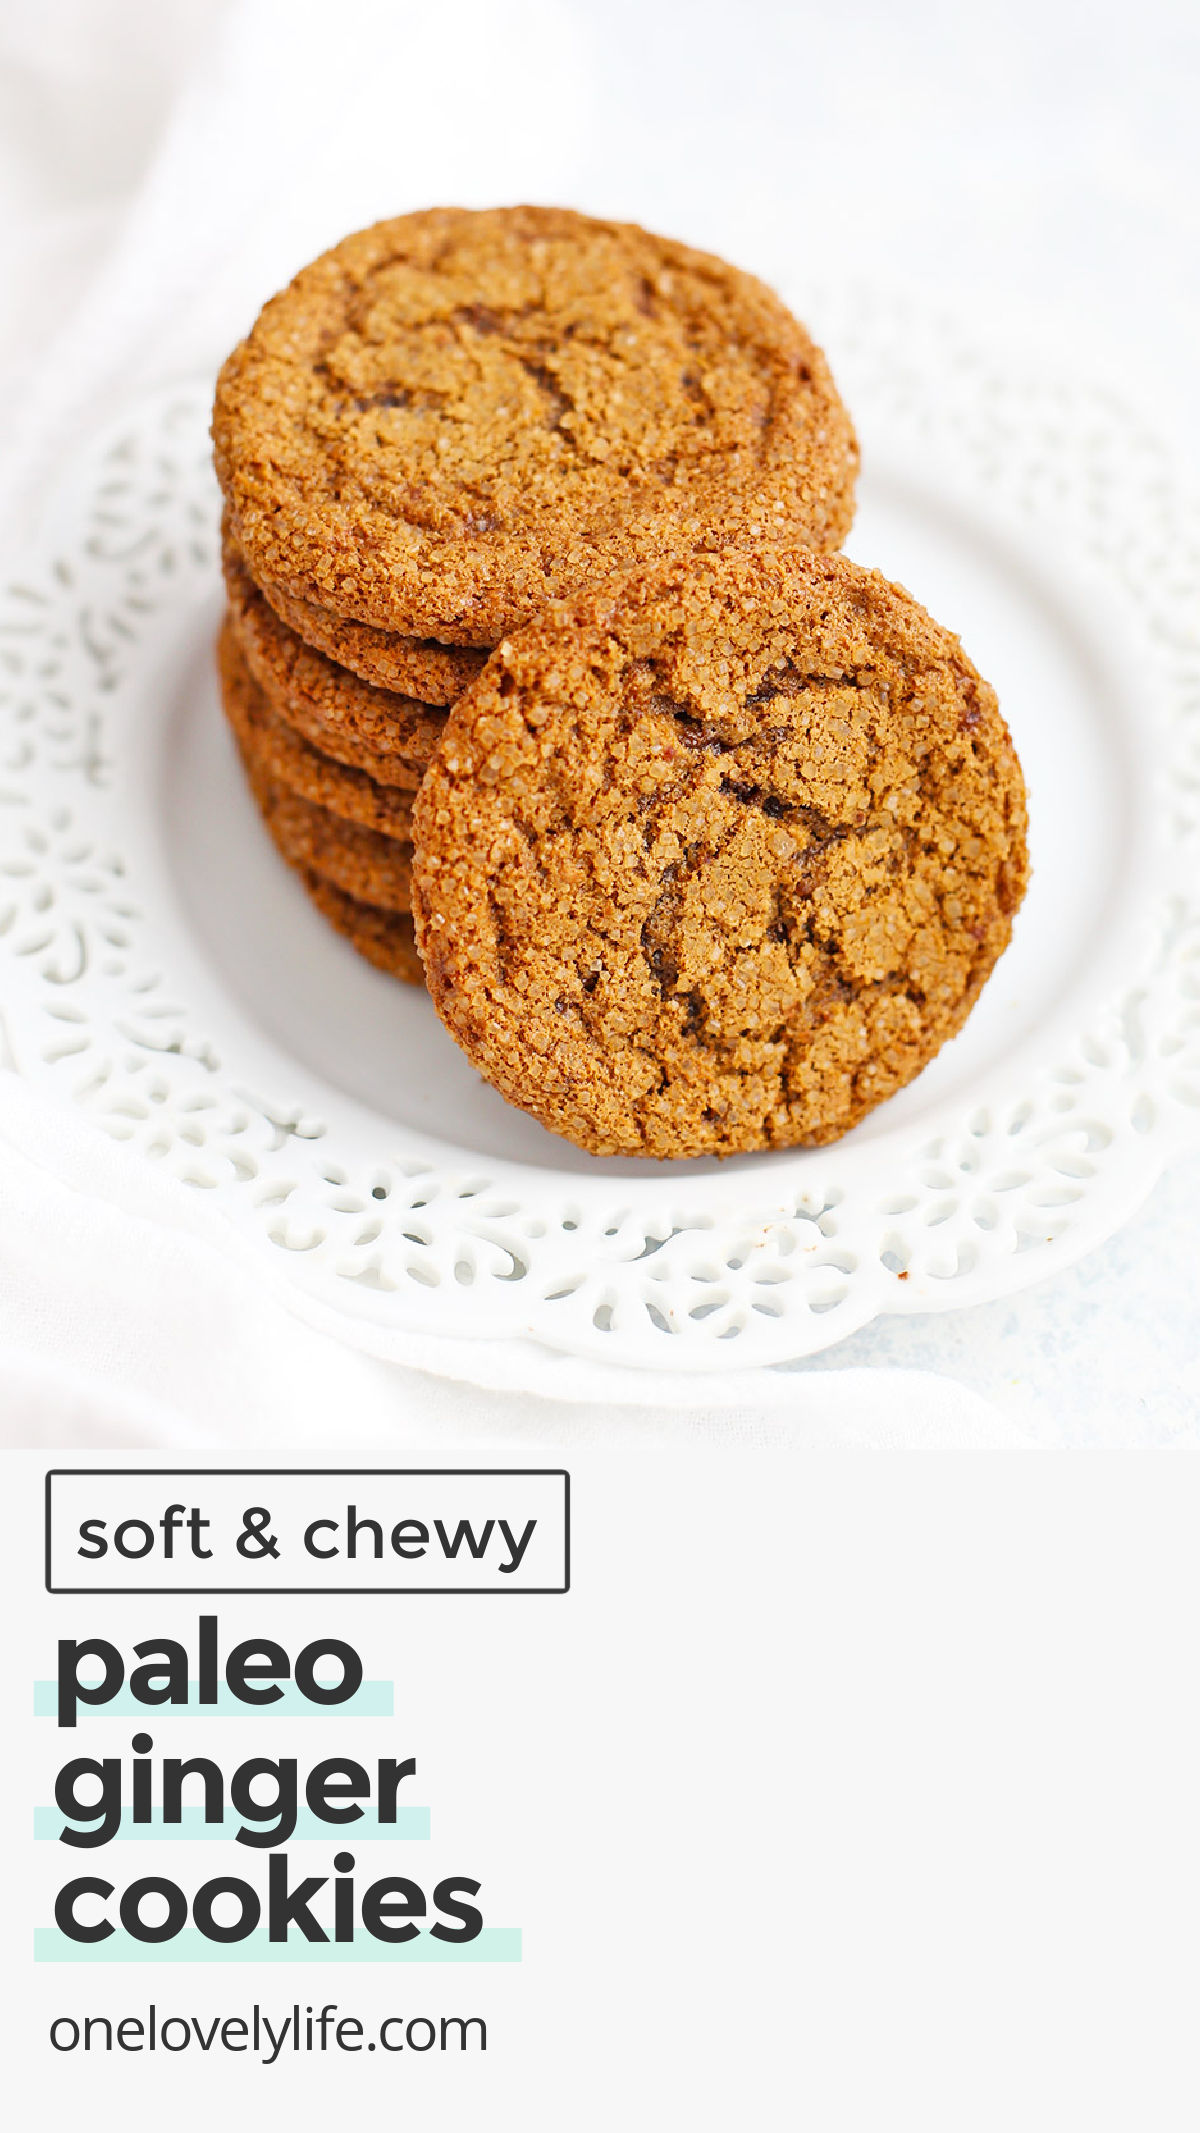 Paleo Ginger Cookies - These gluten free ginger cookies are crisp on the edges and perfectly tender inside. We LOVE THEM! // Paleo Gingersnaps // Gluten free ginger cookies // gluten free gingersnaps // paleo holiday cookie recipe // gluten free gingersnap cookies / almond flour ginger cookies / almond flour gingersnaps